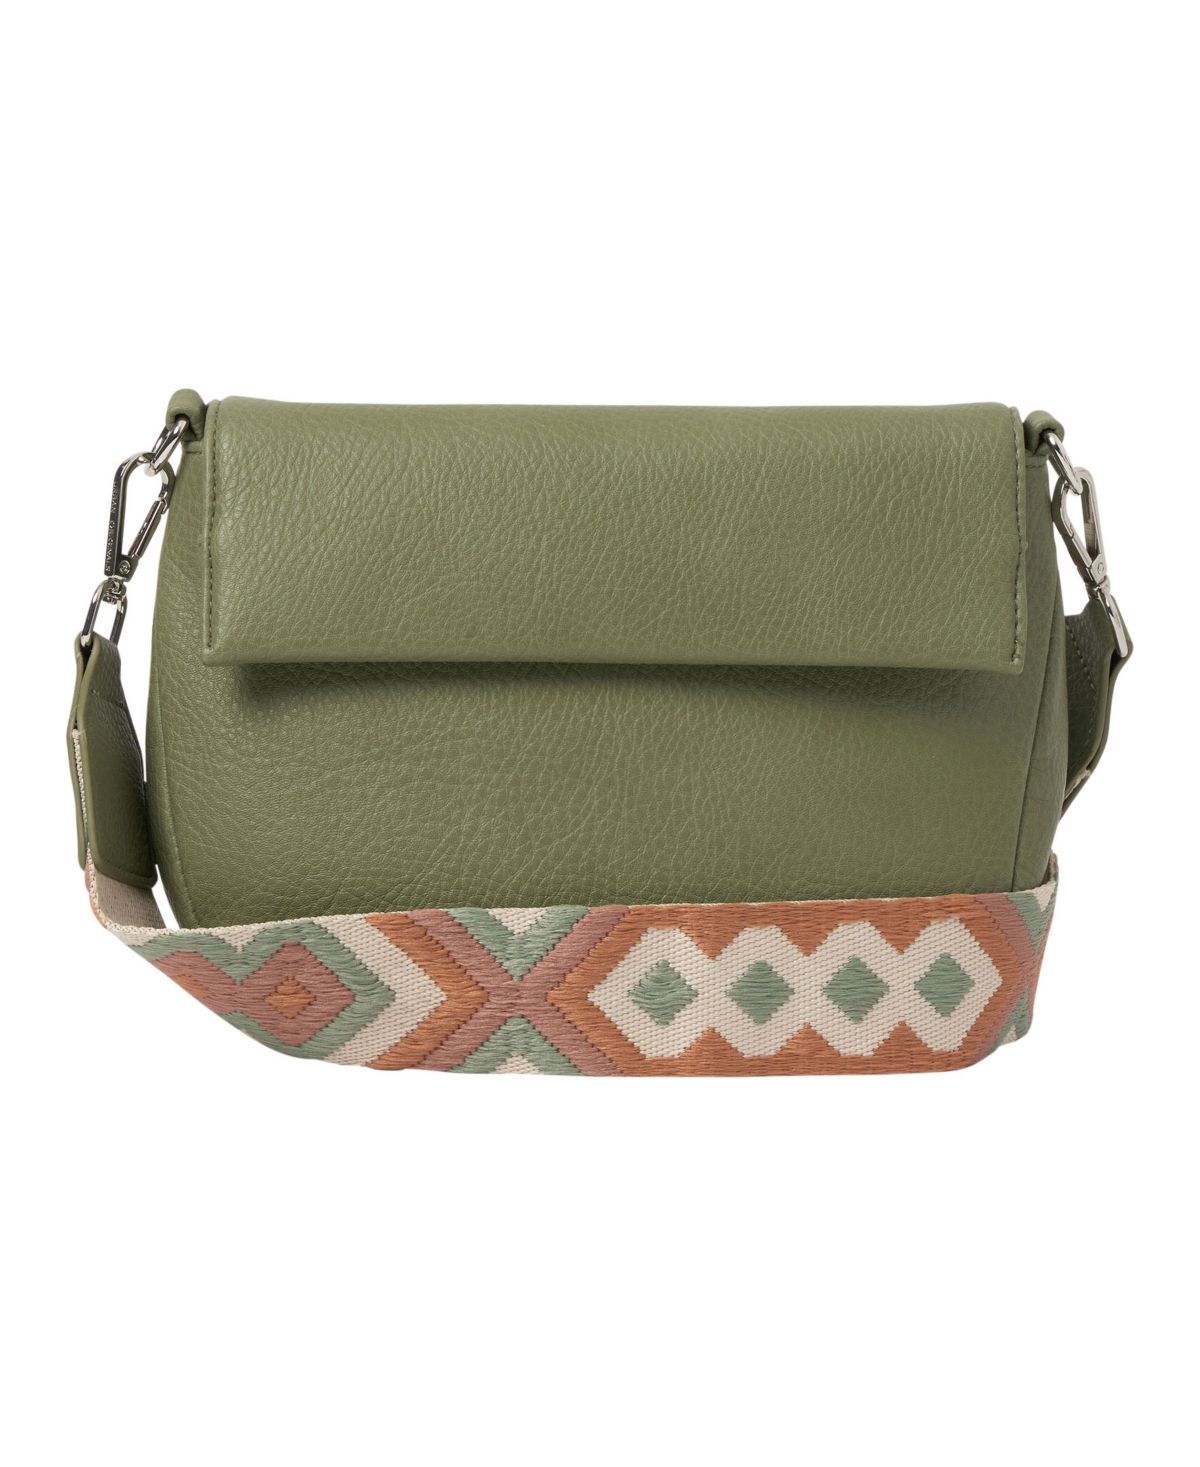 Realism Faux Leather Crossbody Bag - Green